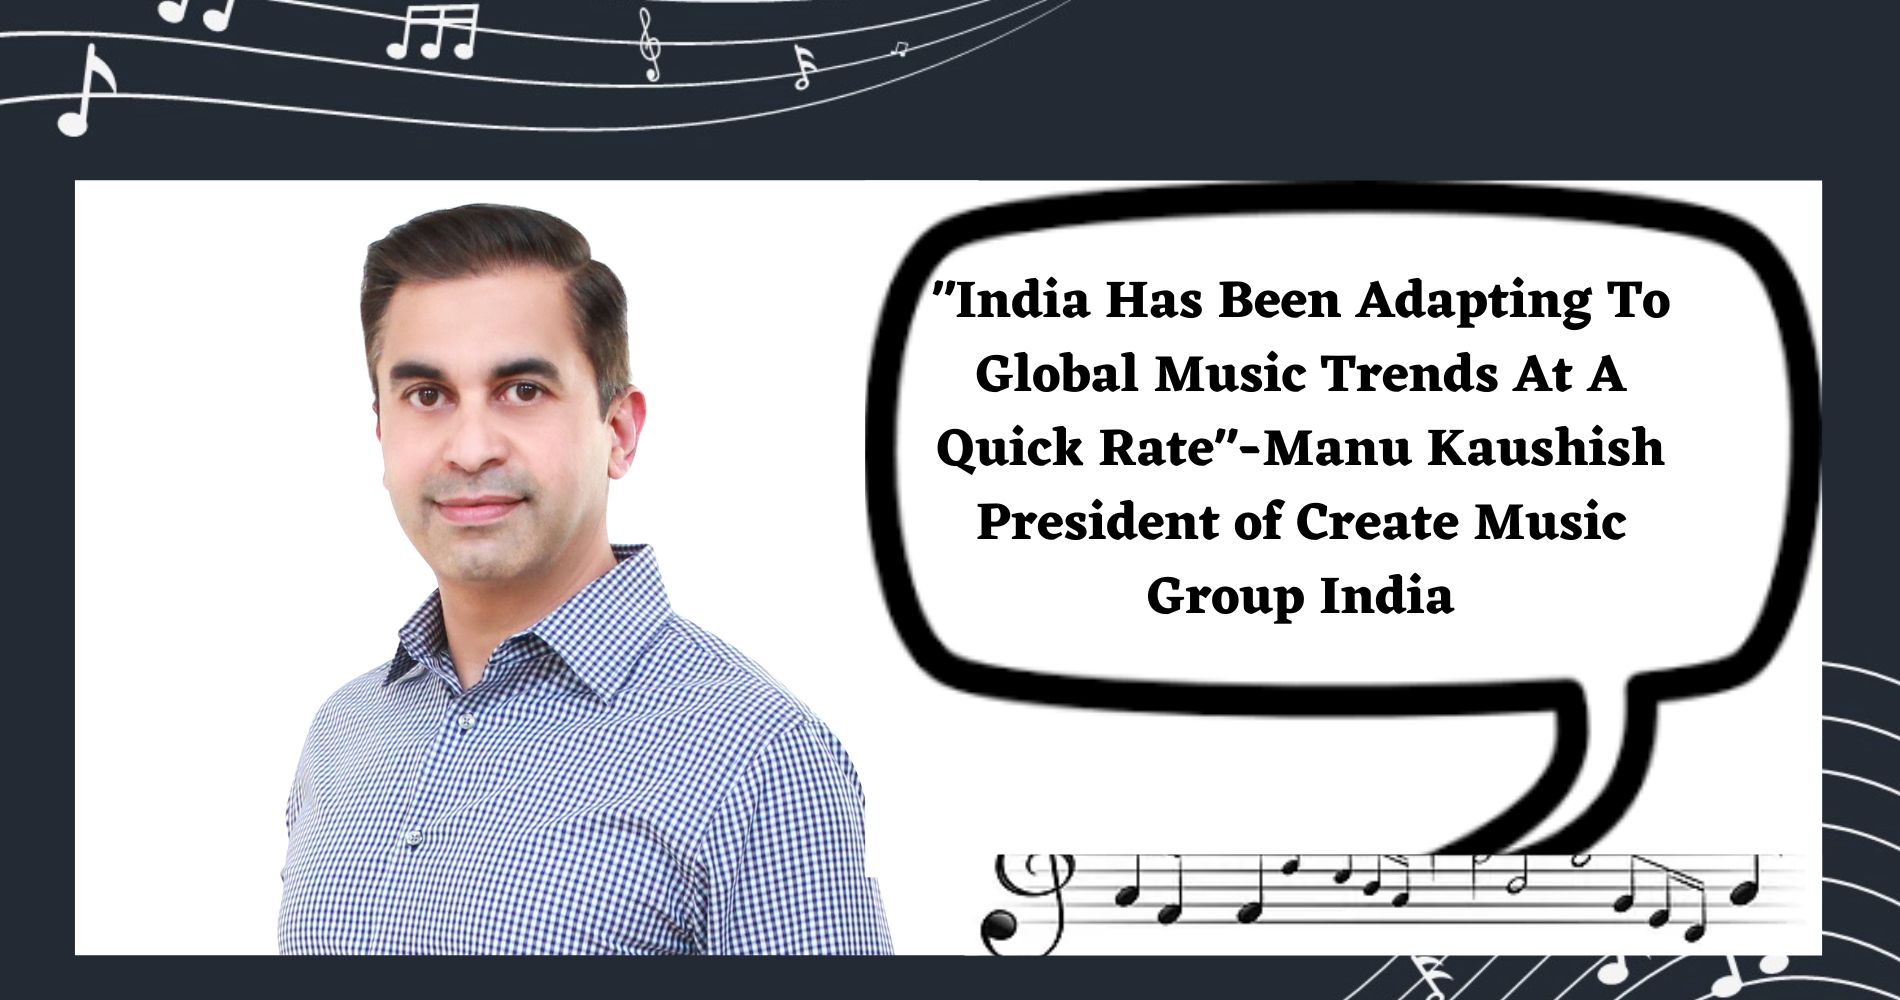 "India Has Been Adapting To Global Music Trends At A